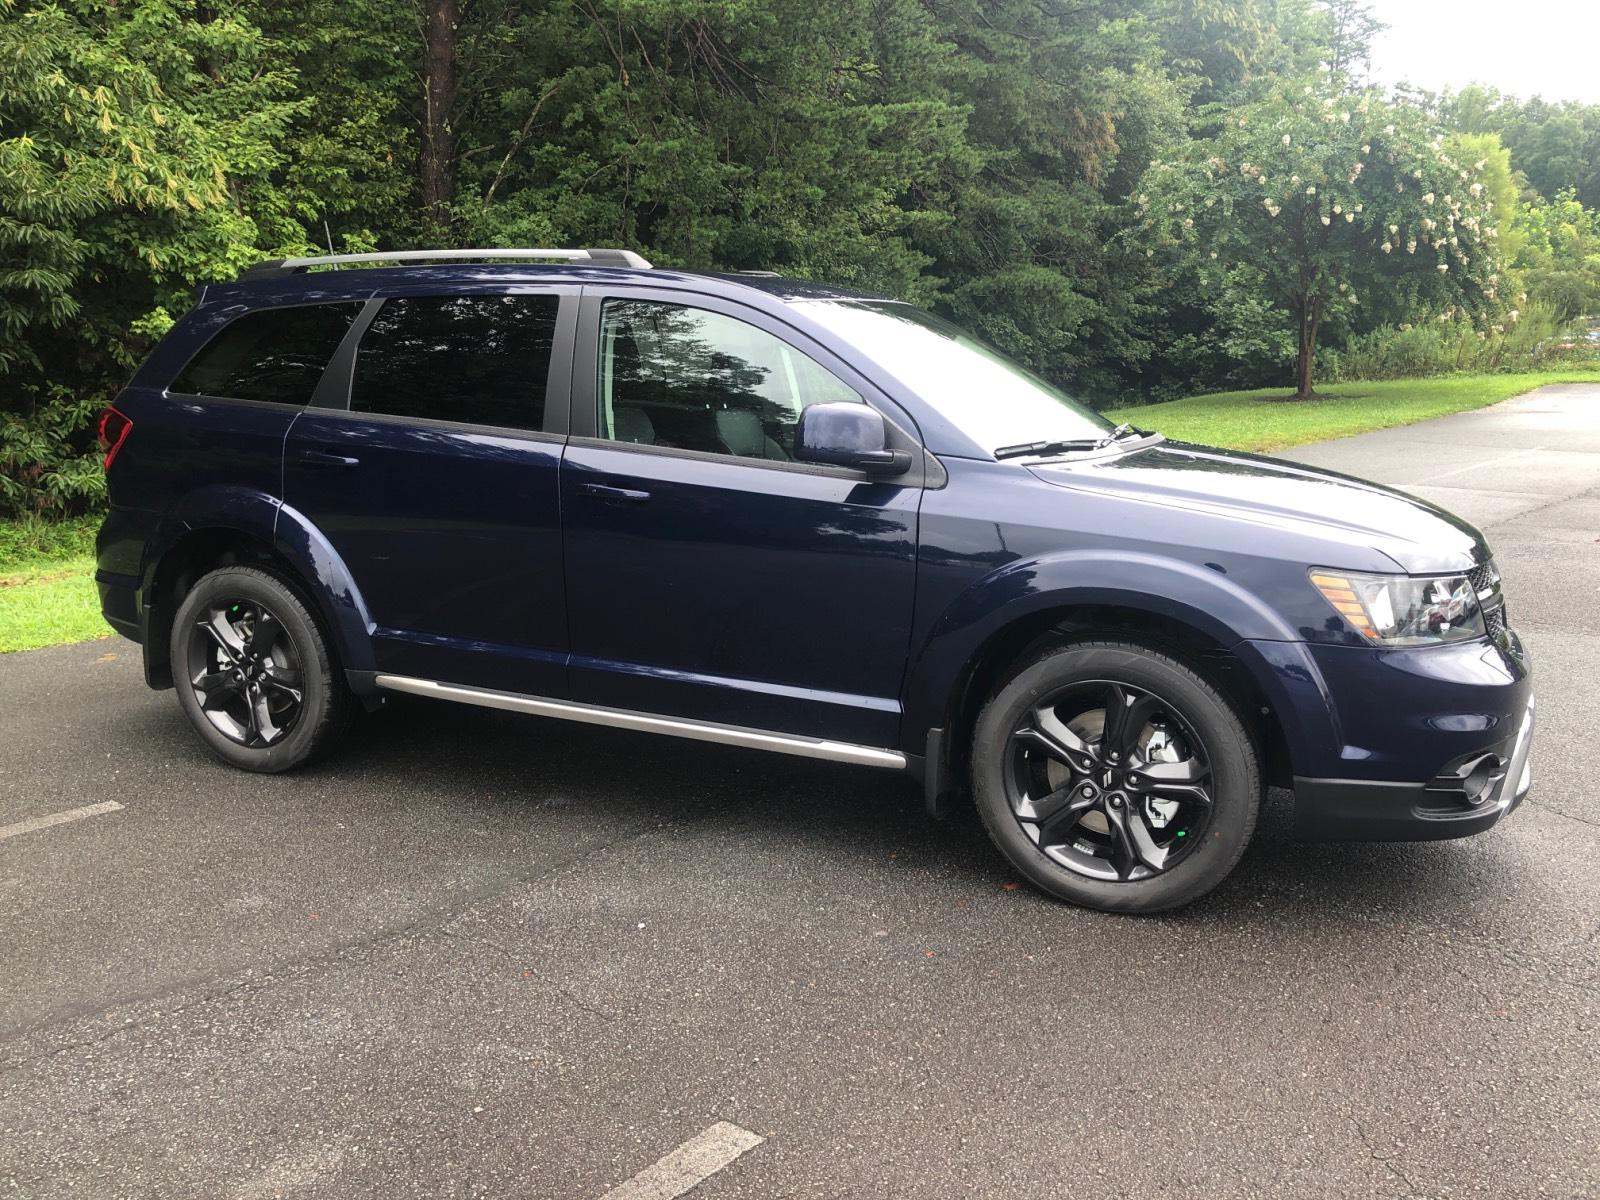 New 2020 DODGE Journey Crossroad FWD Sport Utility in Mount Airy C2243 